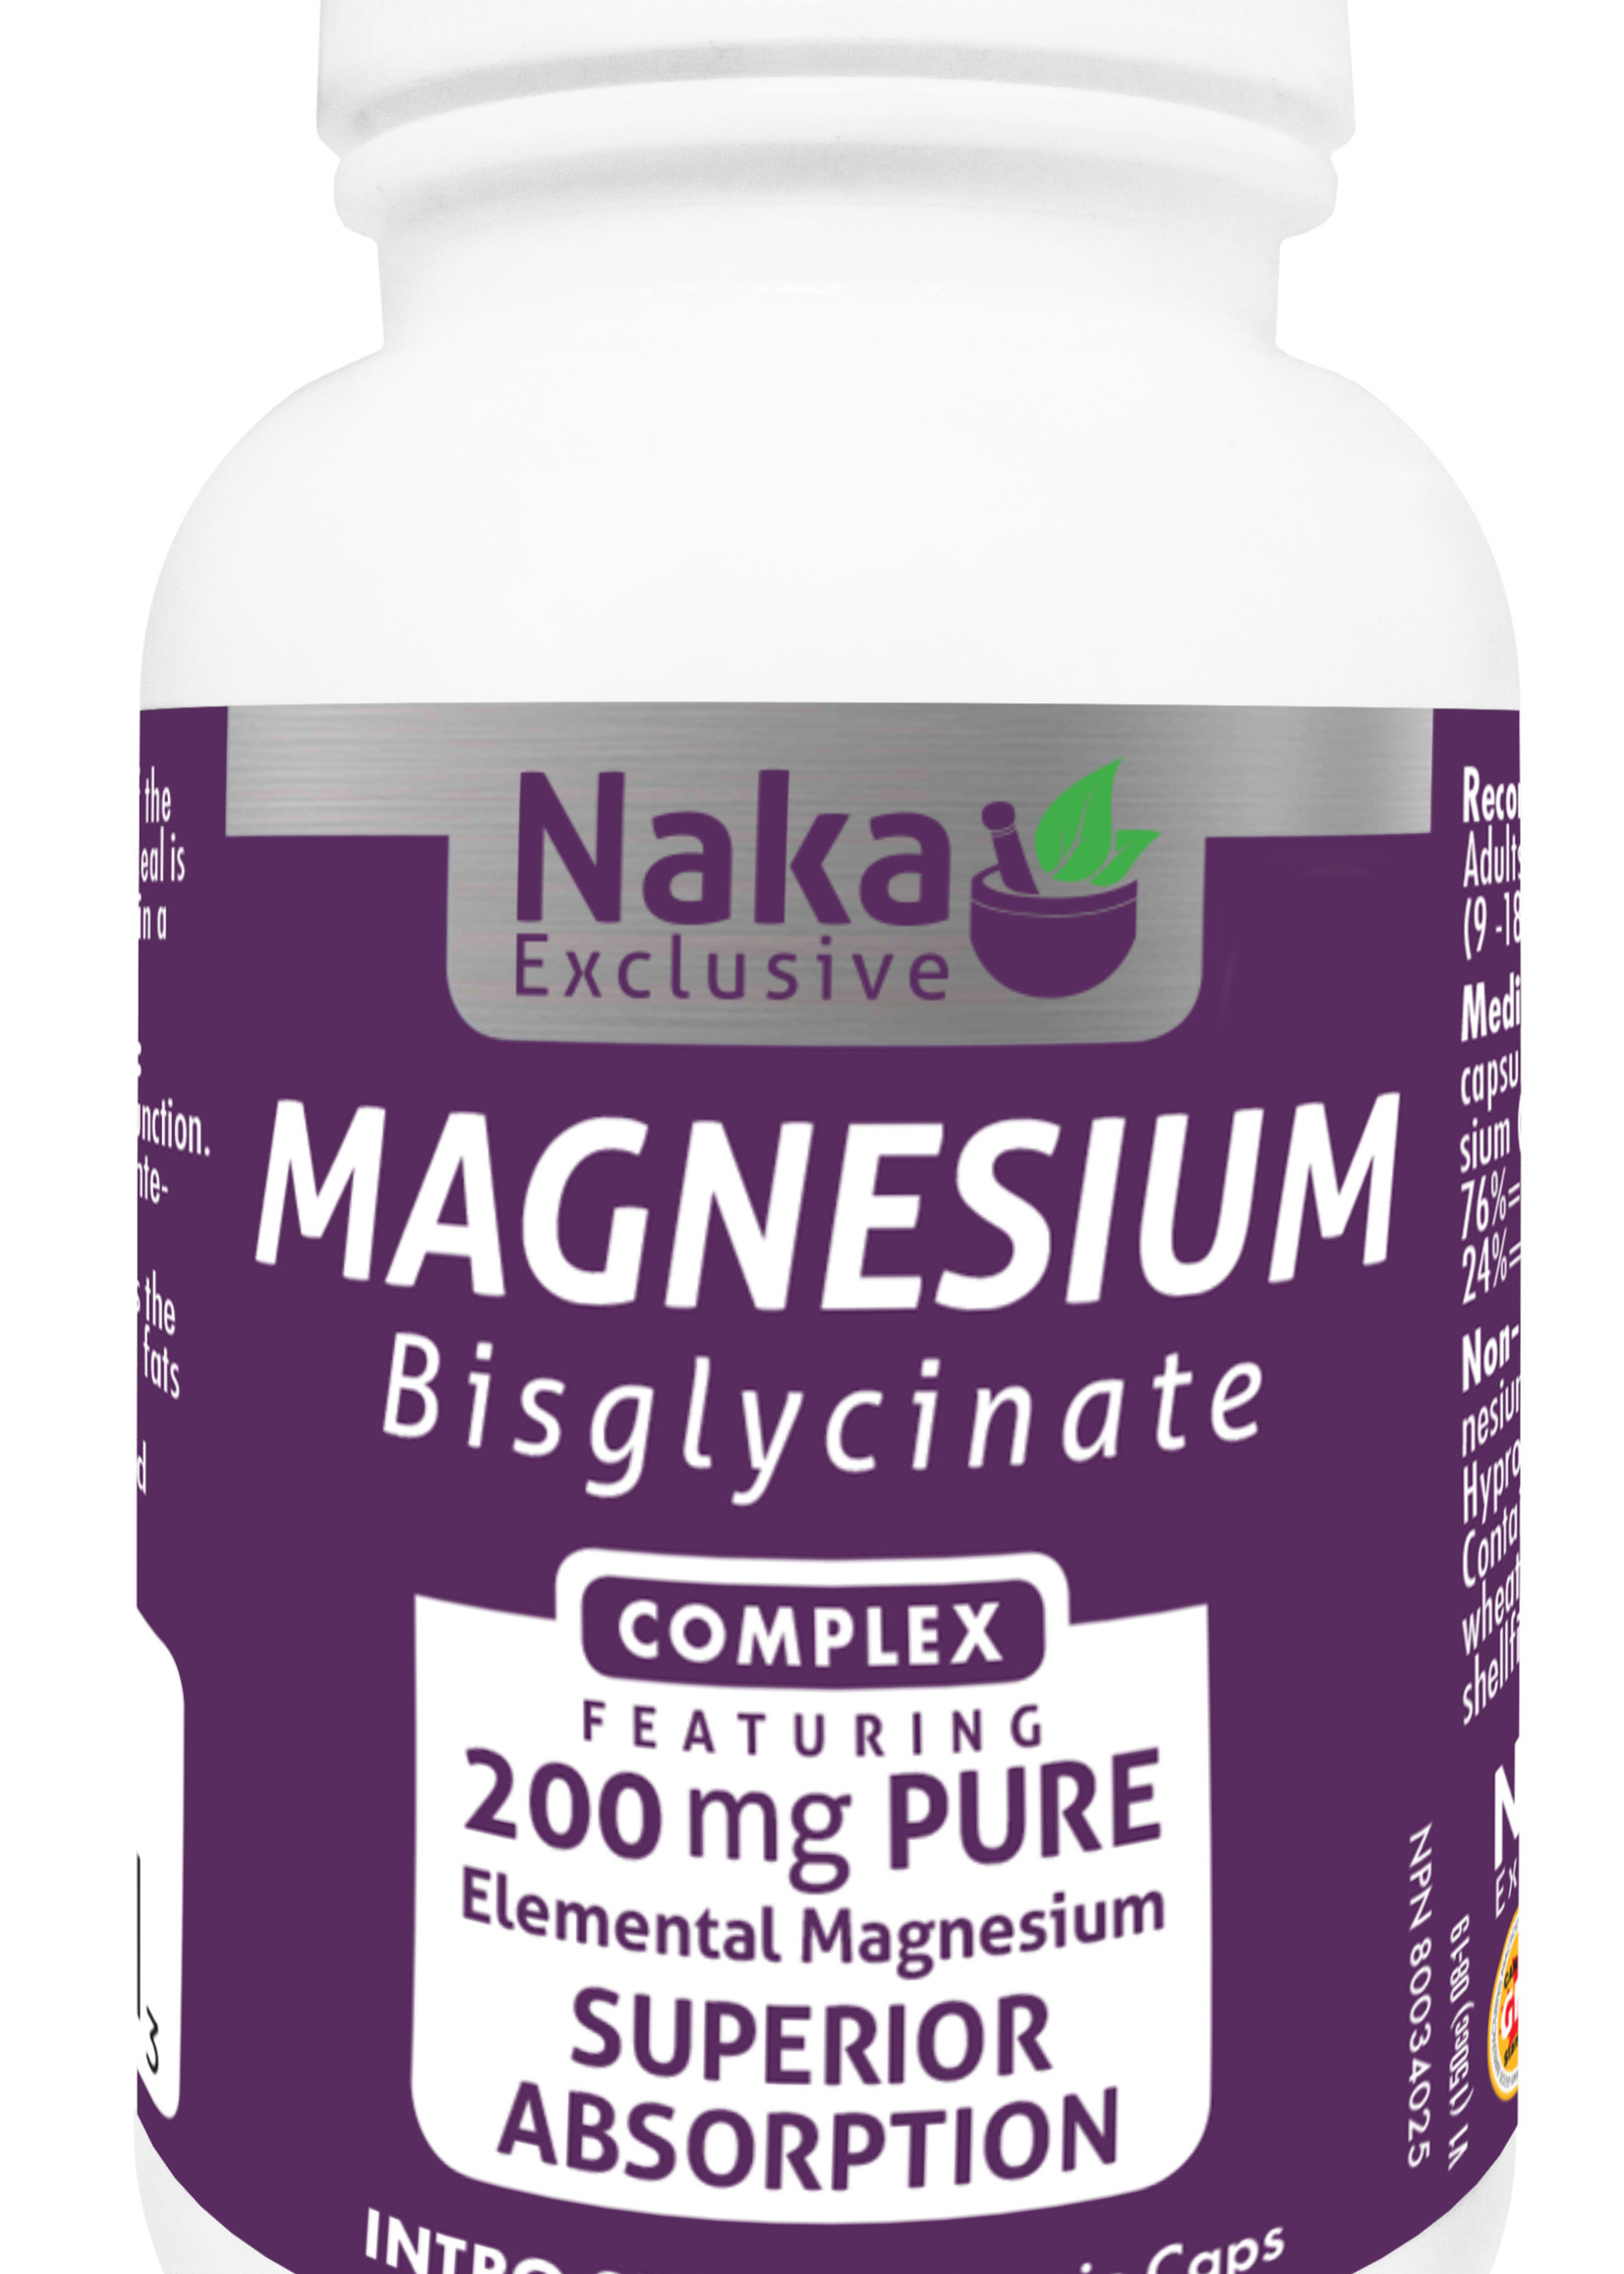 Naka Magnesium Bisglycinate complex 200mg - 50vcaps